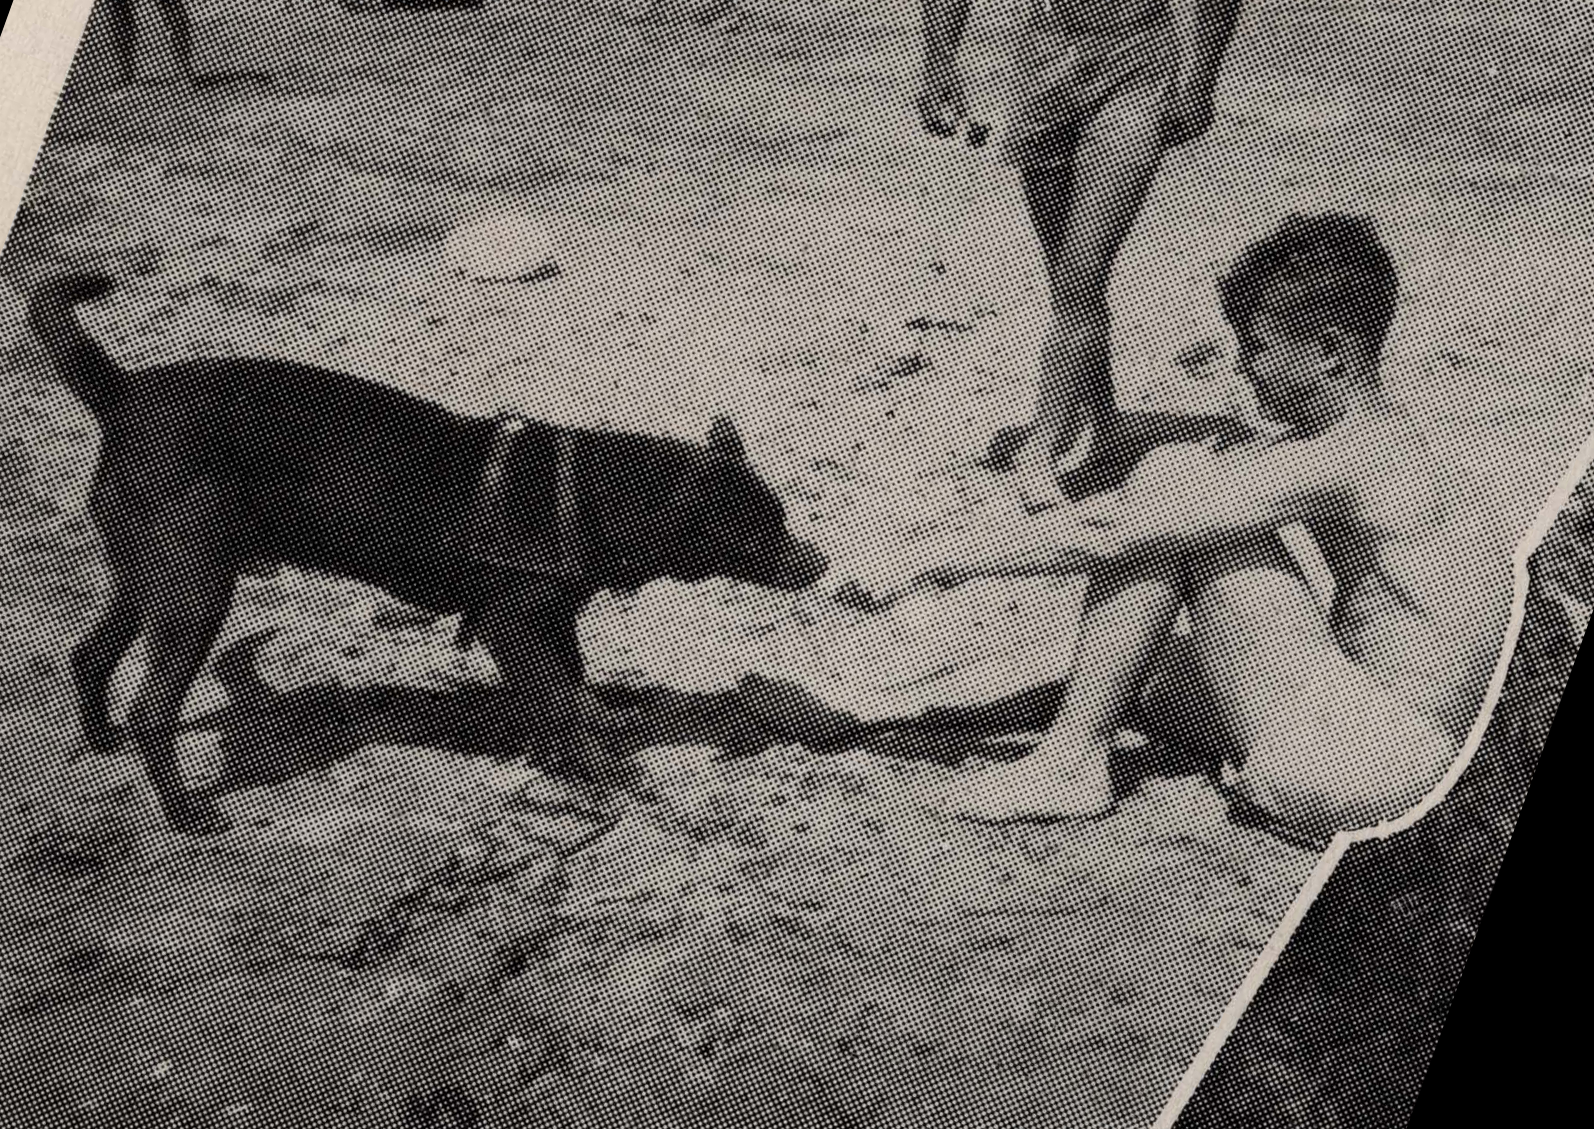 Young adult plays with a dog at the beach.